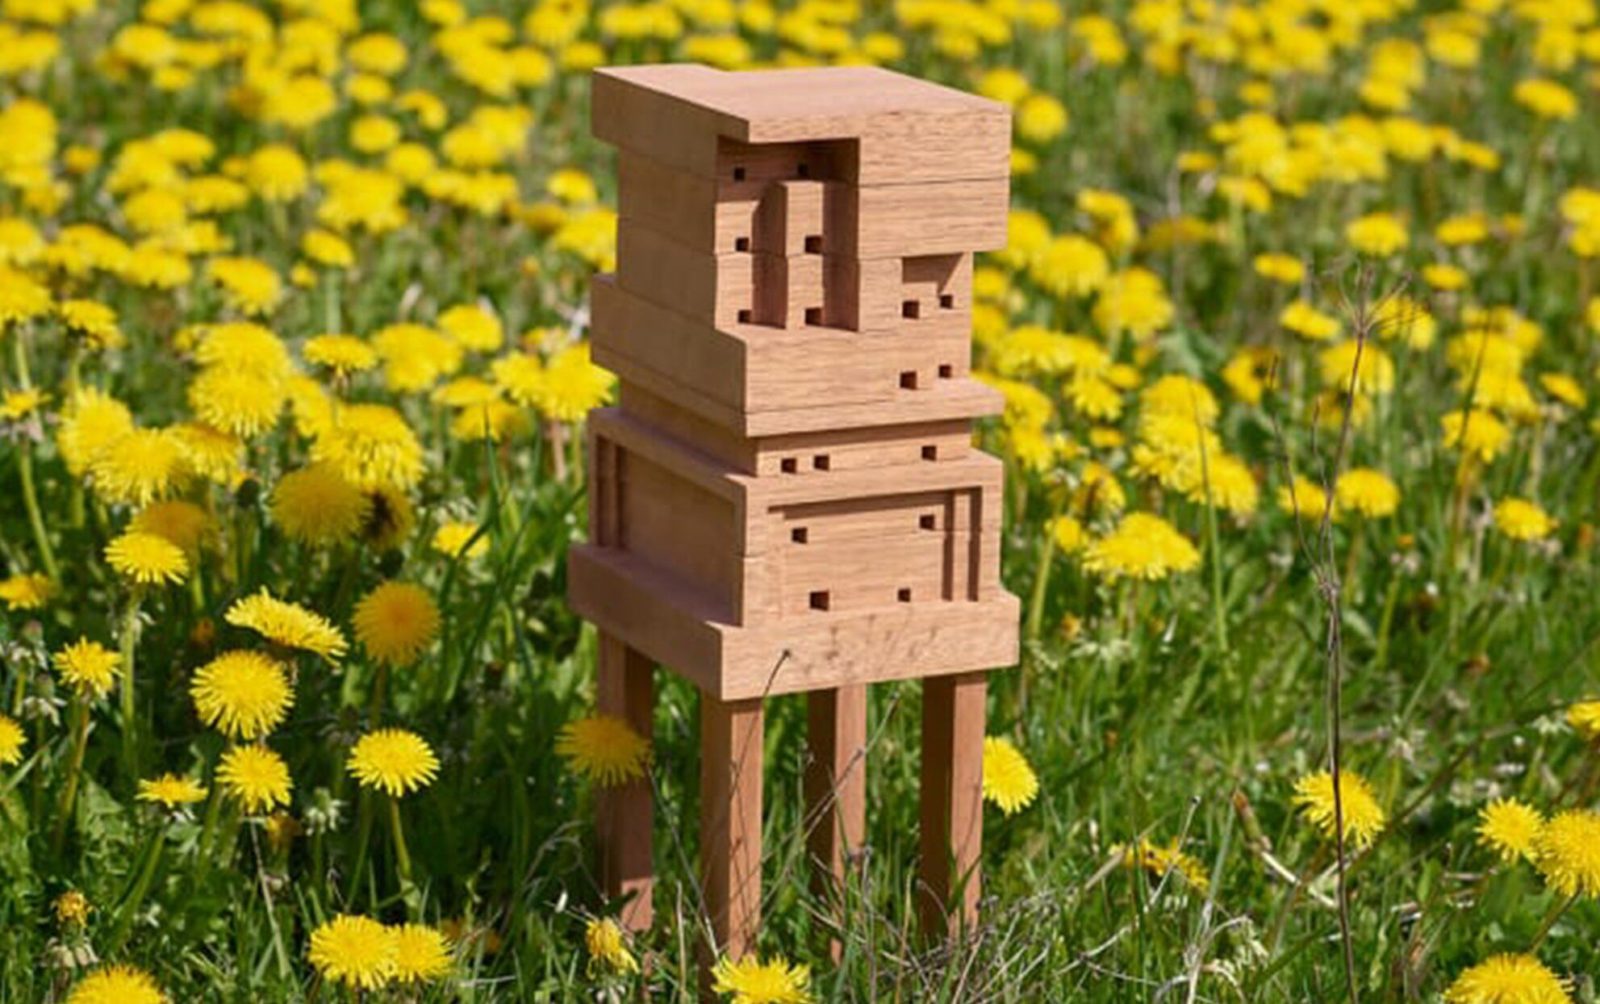 Help Bees Thrive in Your Backyard with This Free DIY Bee Home Design Tool